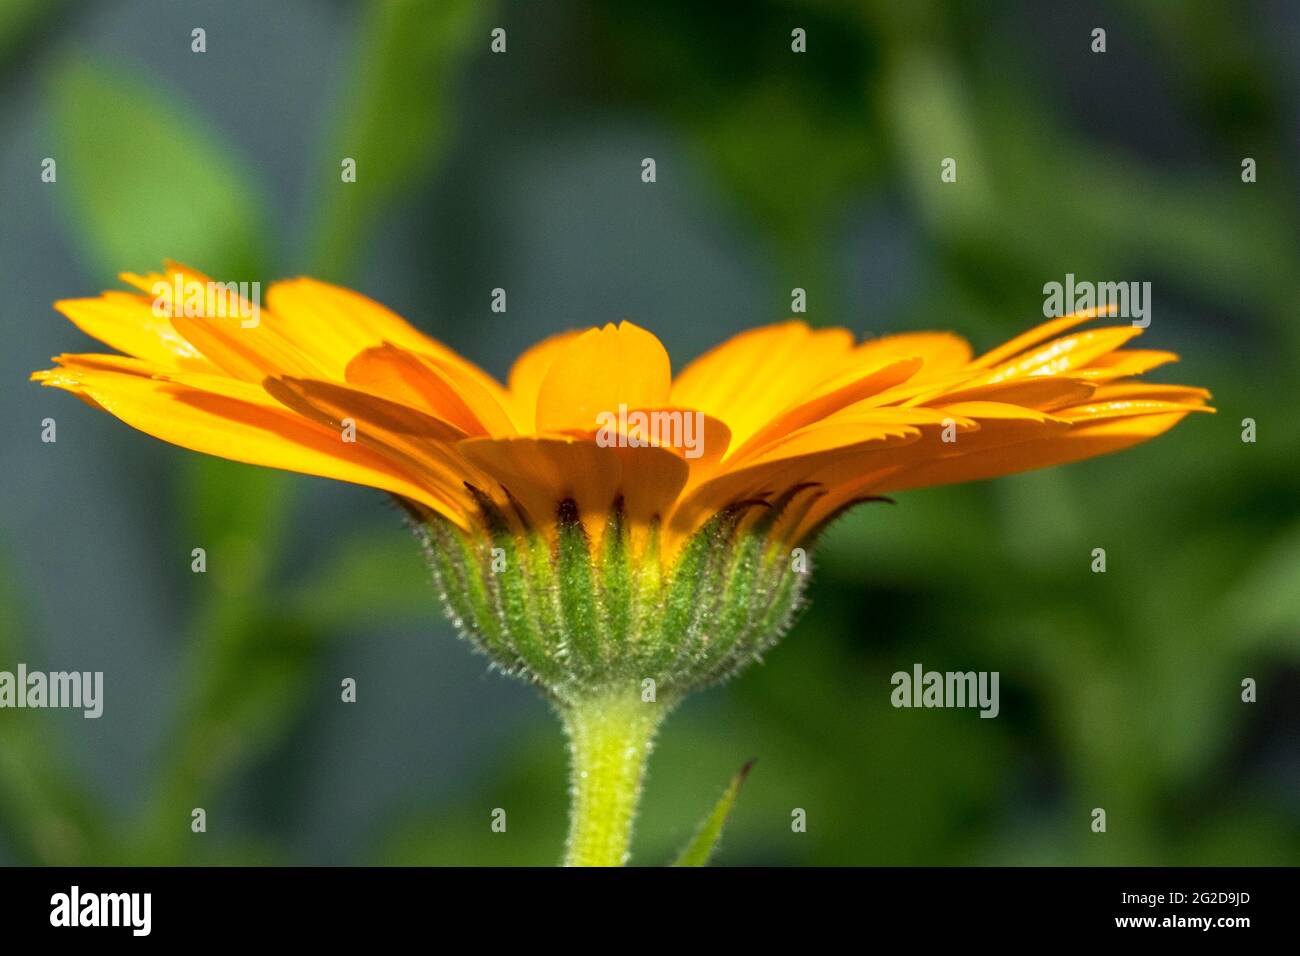 Beautiful marigold flower in the foreground Stock Photo